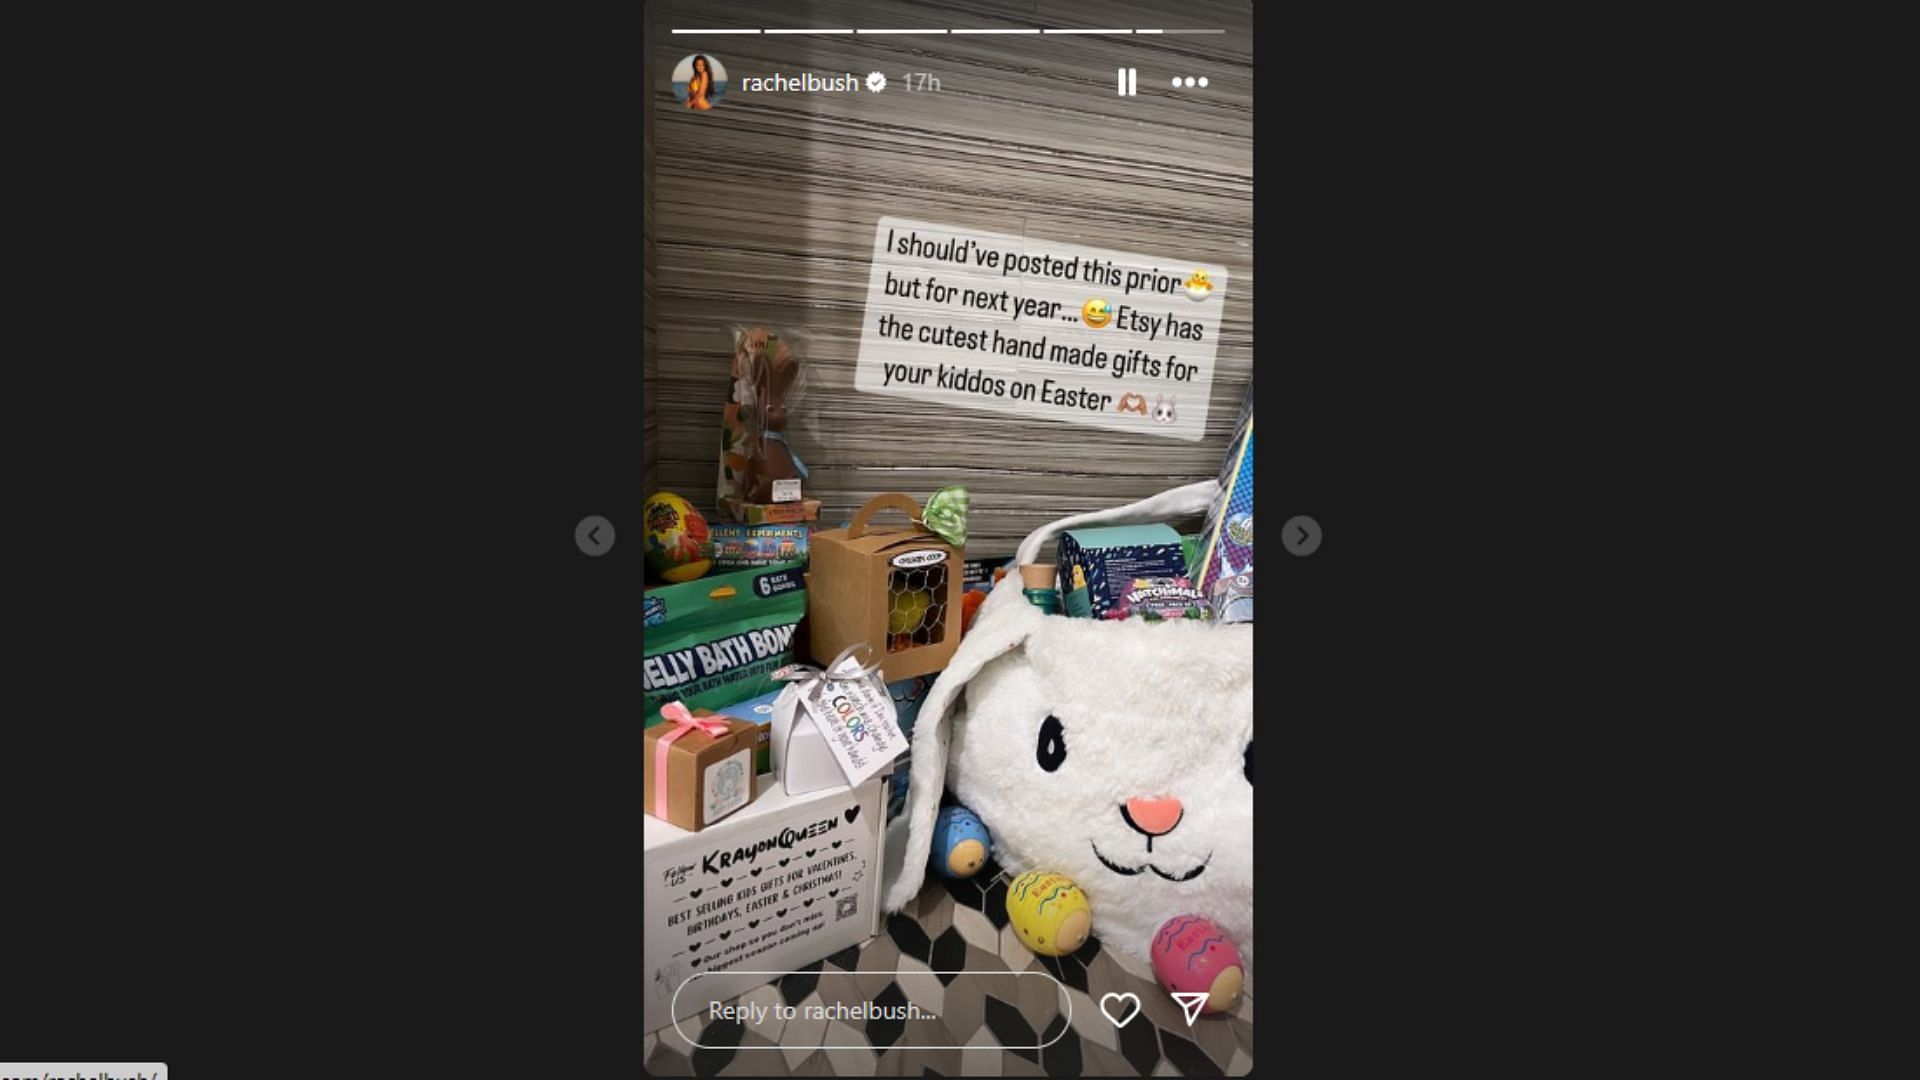 Rachel Bush also shared her daughter&#039;s Easter basket and gave ideas to other parents.